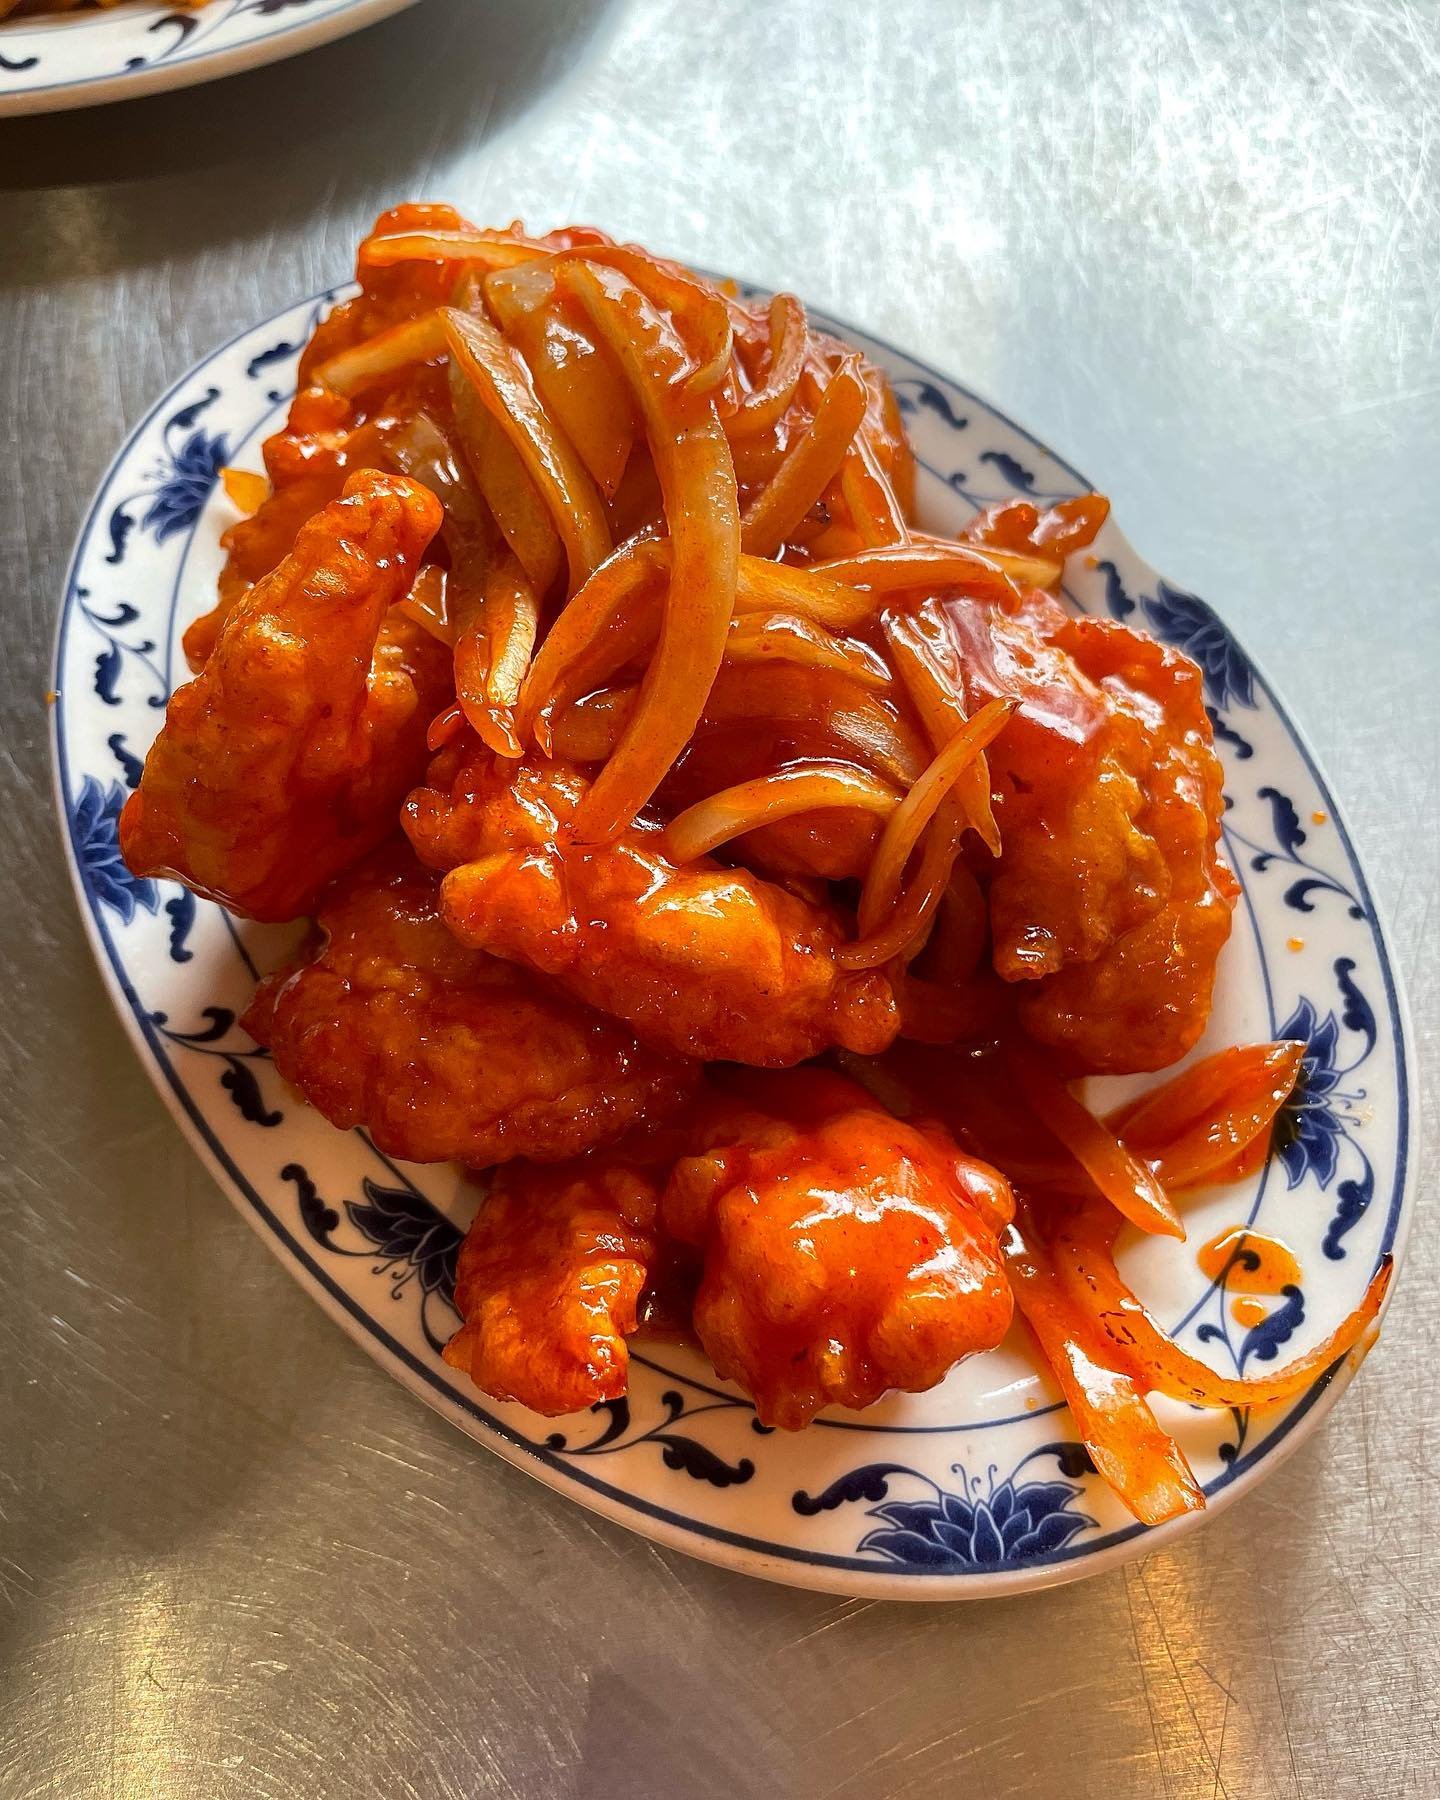 My first visit to Kimchi was with some of my best friends when we lived together on Cathedral Road. I still think about the prawns @conordando11 had that evening.
I returned the following week with Millie in the early stages of our relationship, dran